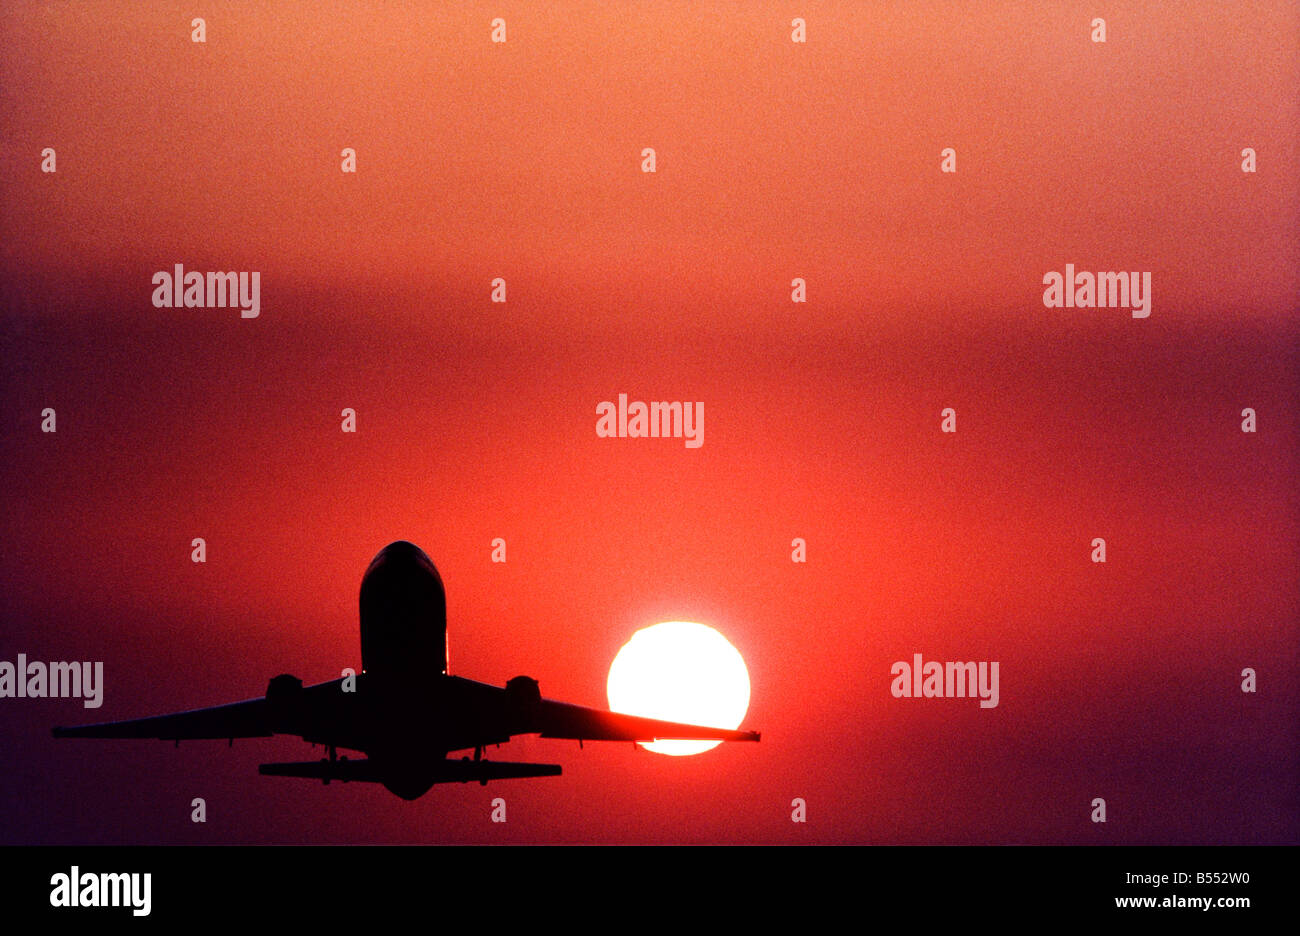 Commercial Aviation, Aircraft in flight. Stock Photo